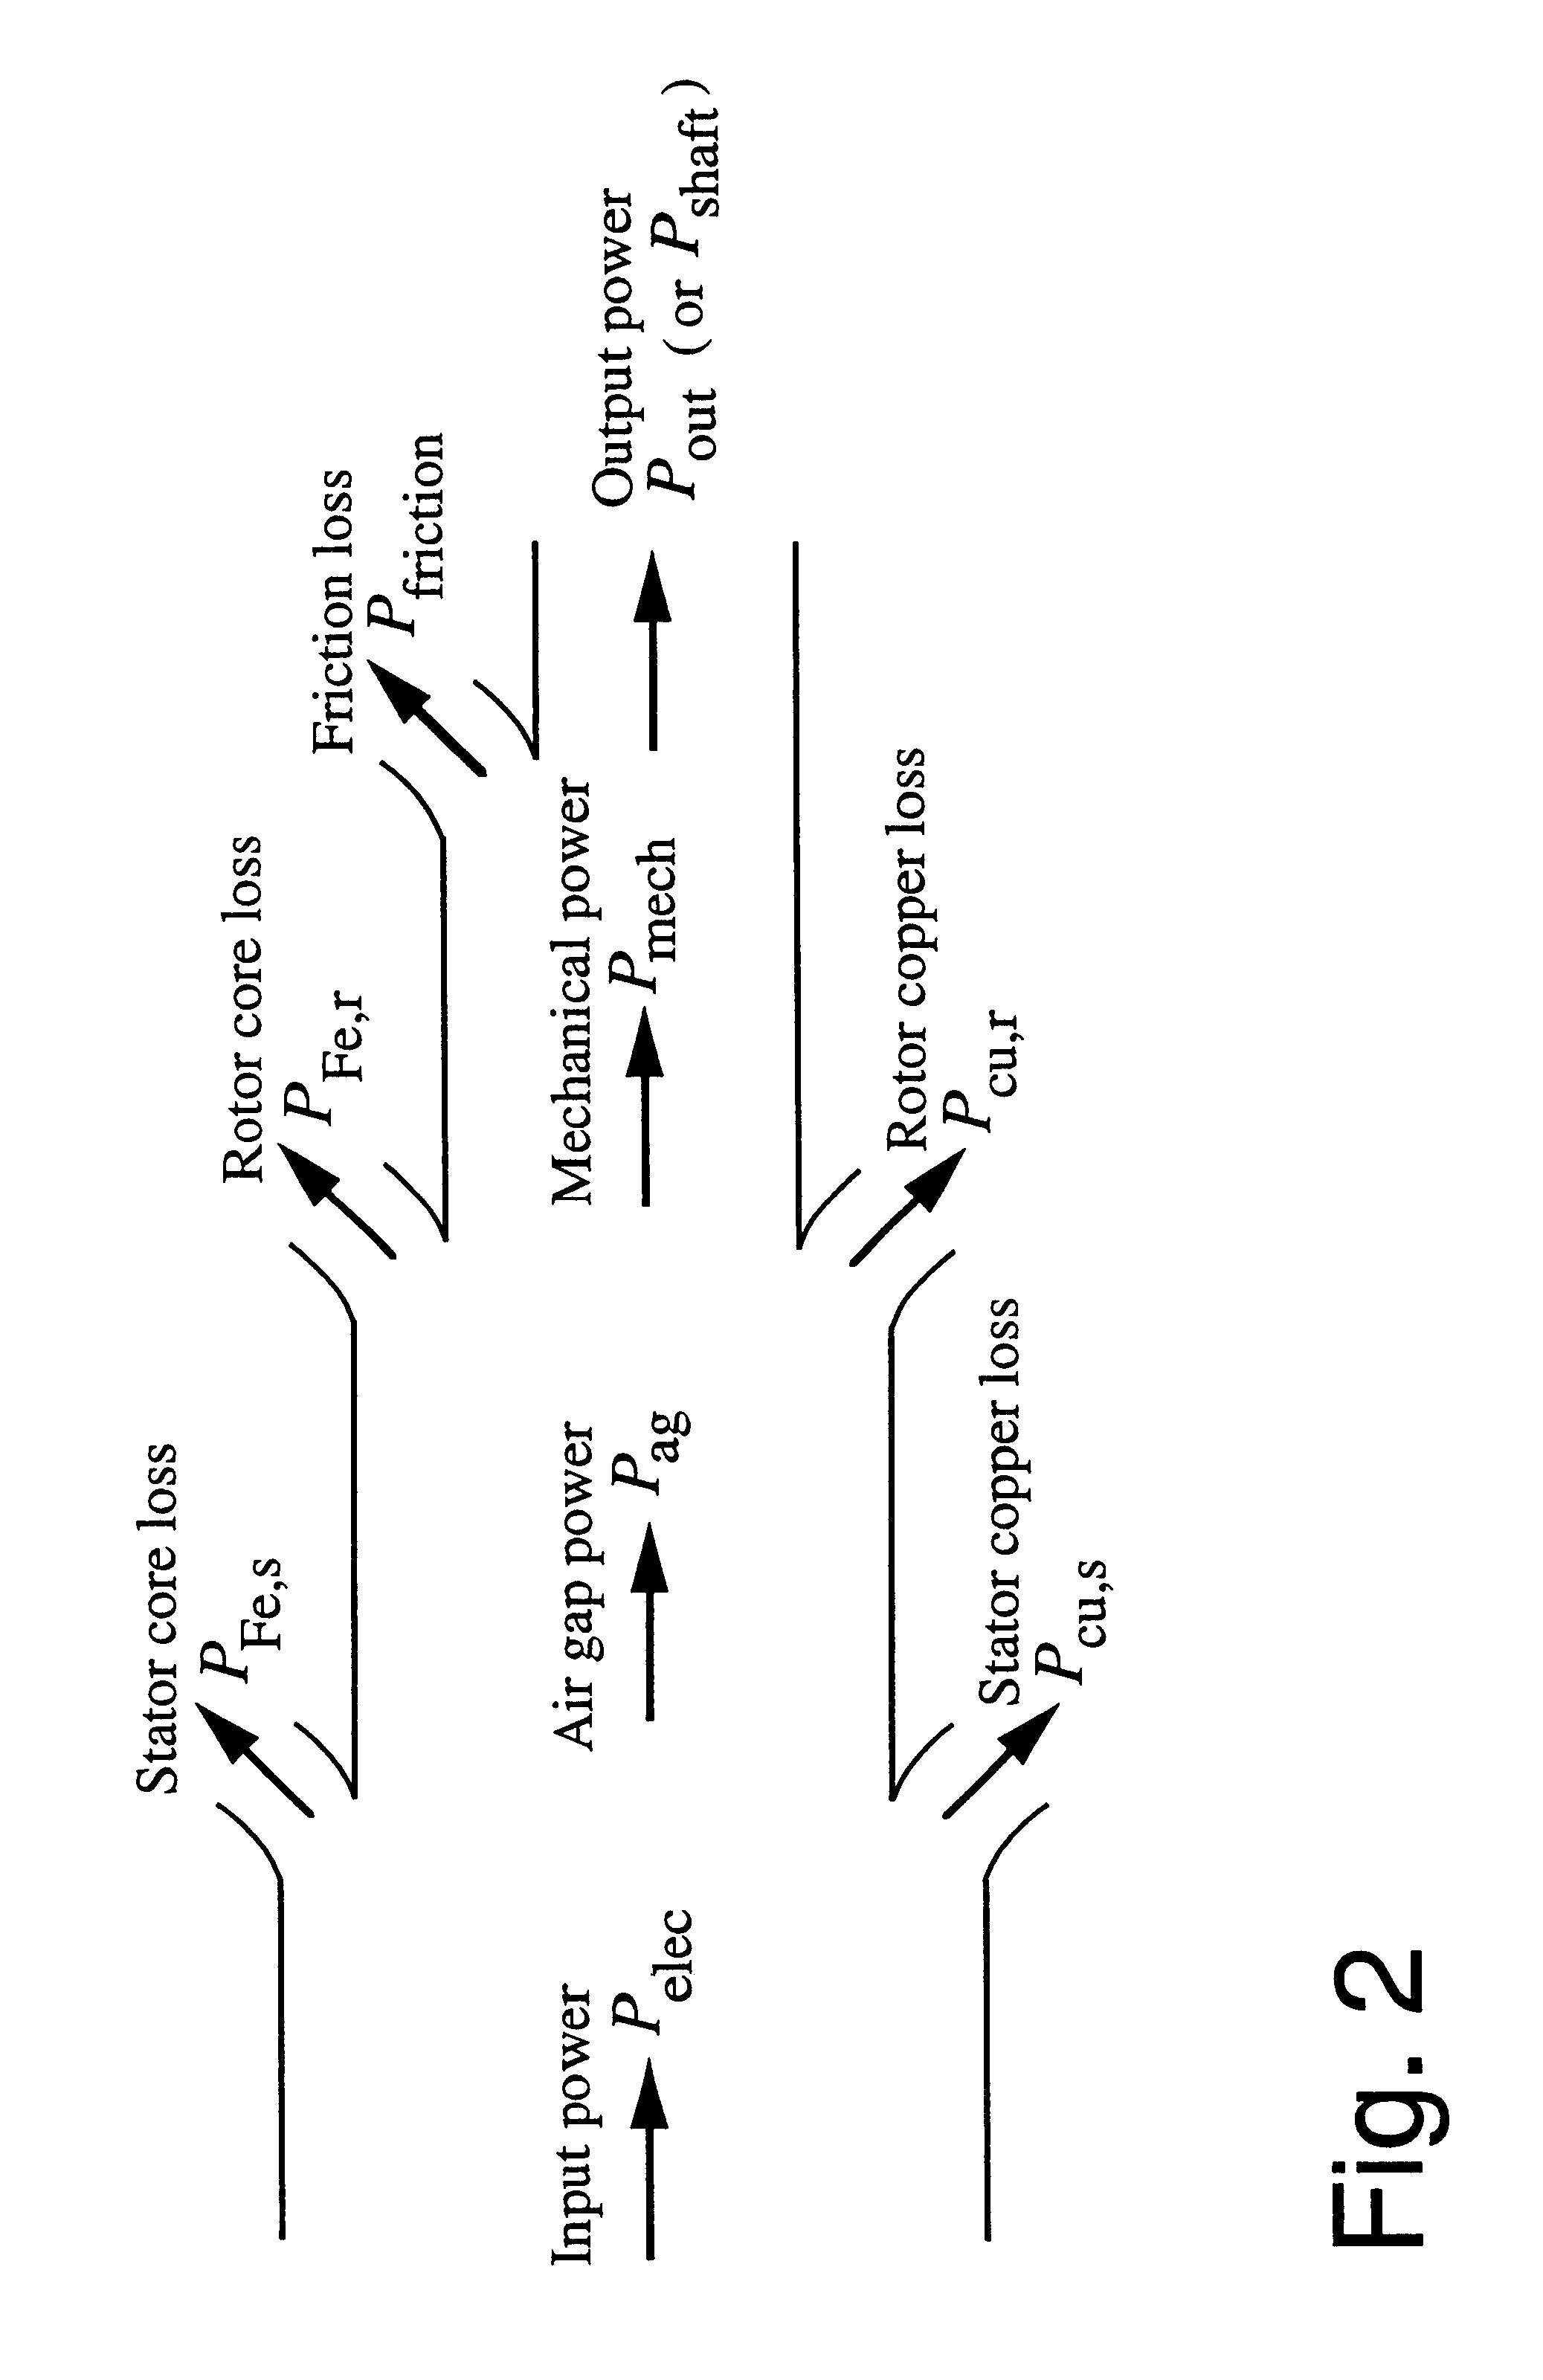 Method of braking a vector controlled induction machine, control device for carrying out the method and storage medium